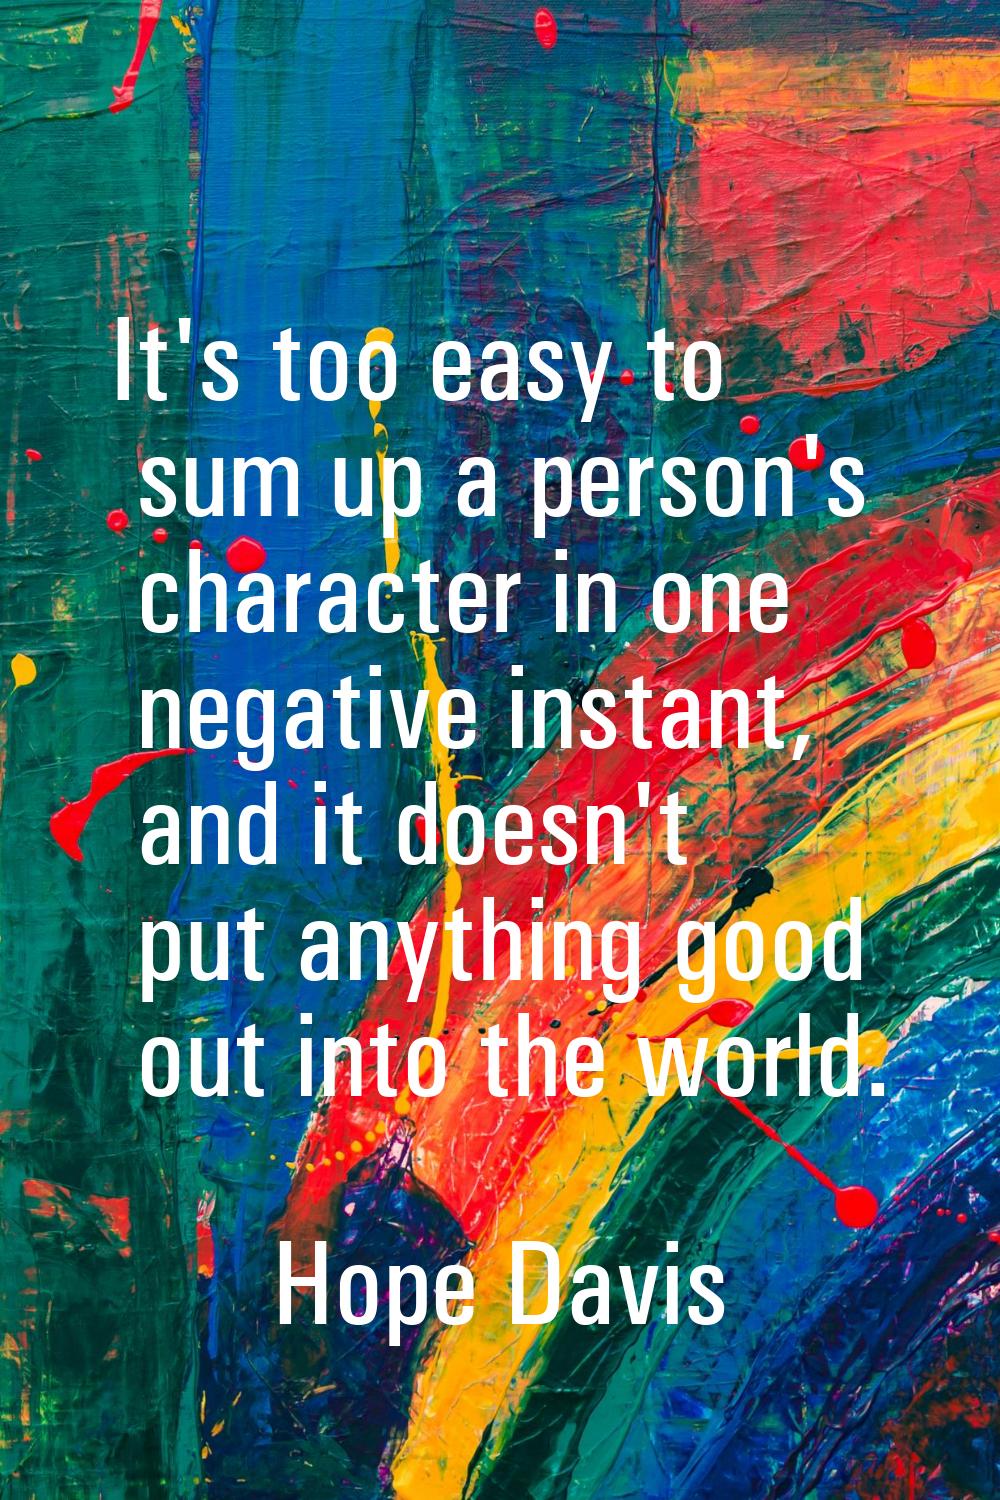 It's too easy to sum up a person's character in one negative instant, and it doesn't put anything g